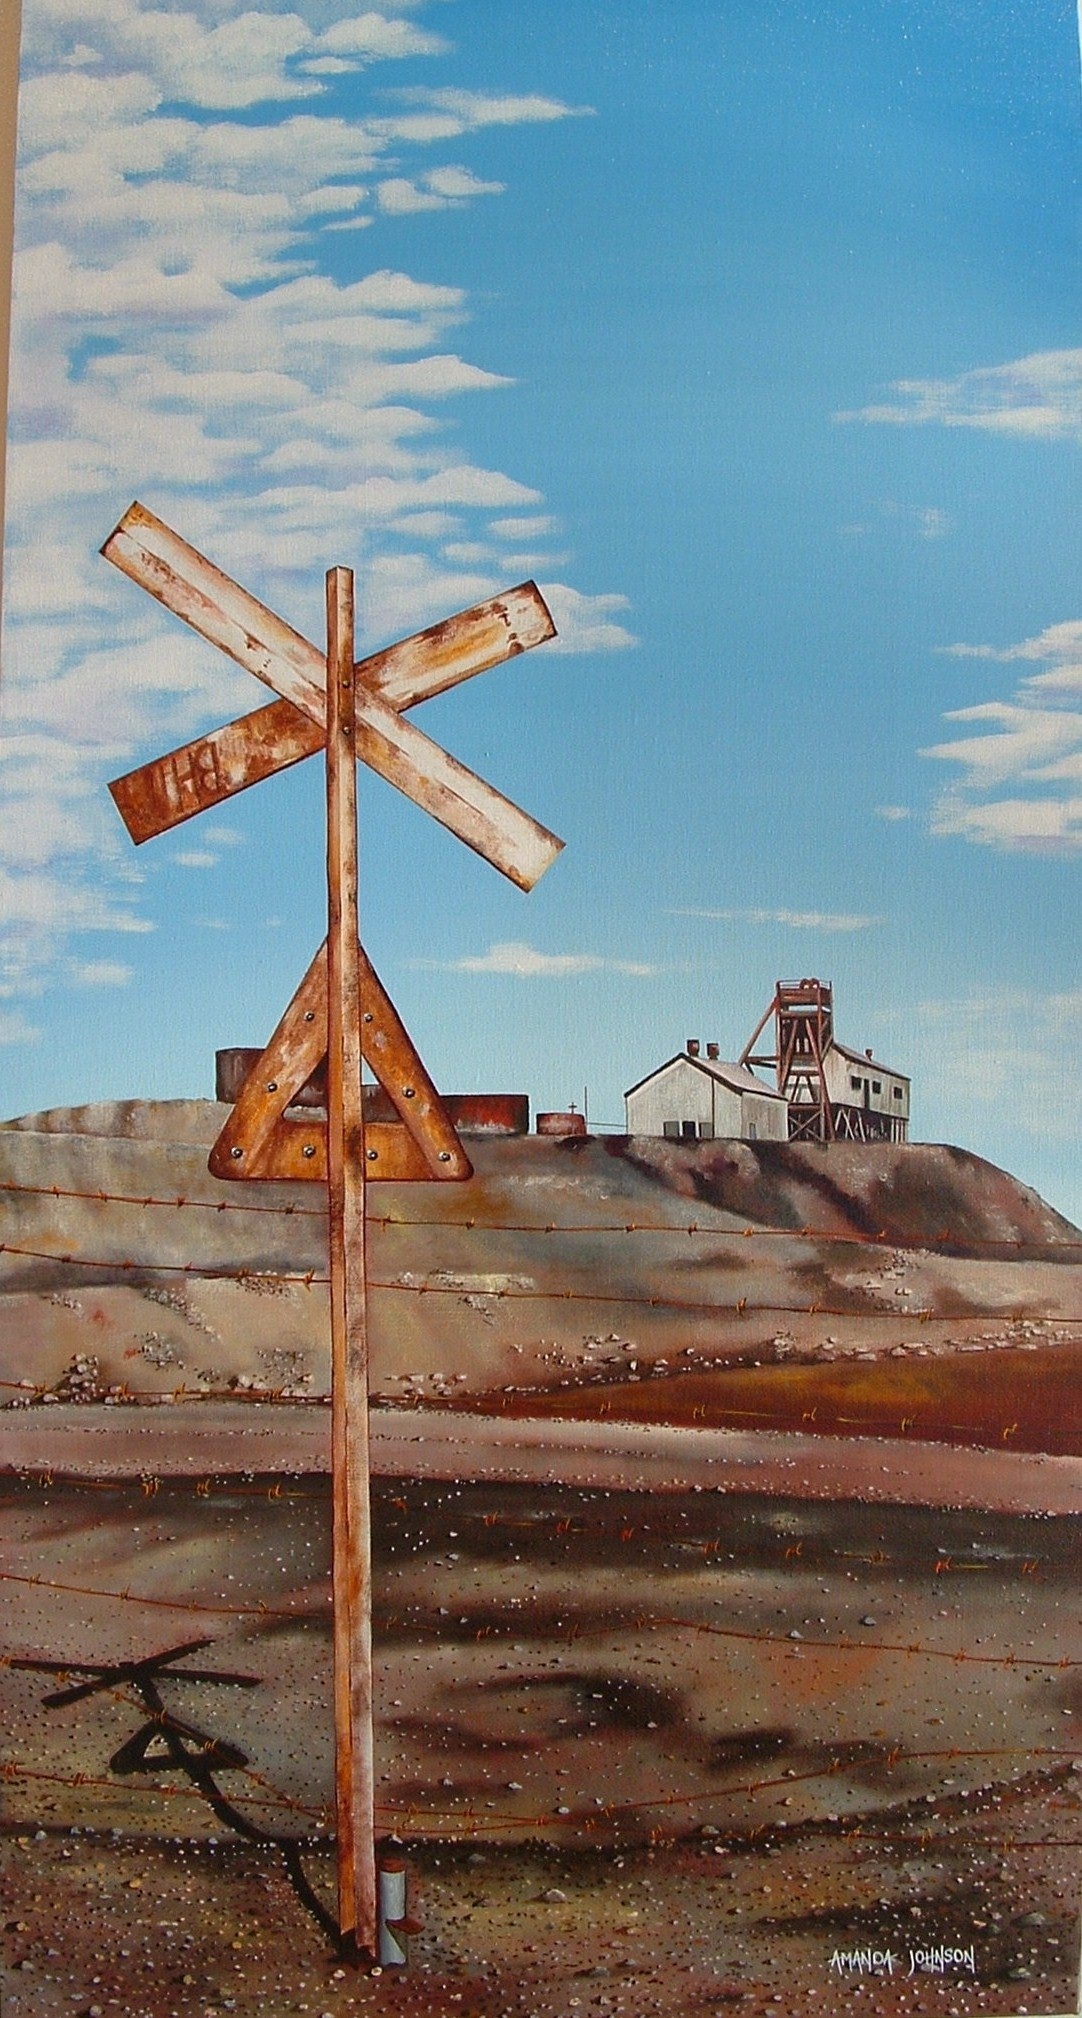 The back of a rail crossing sign in the foreground and a mine headframe and buildings in the background with red and brown tones of earth in between